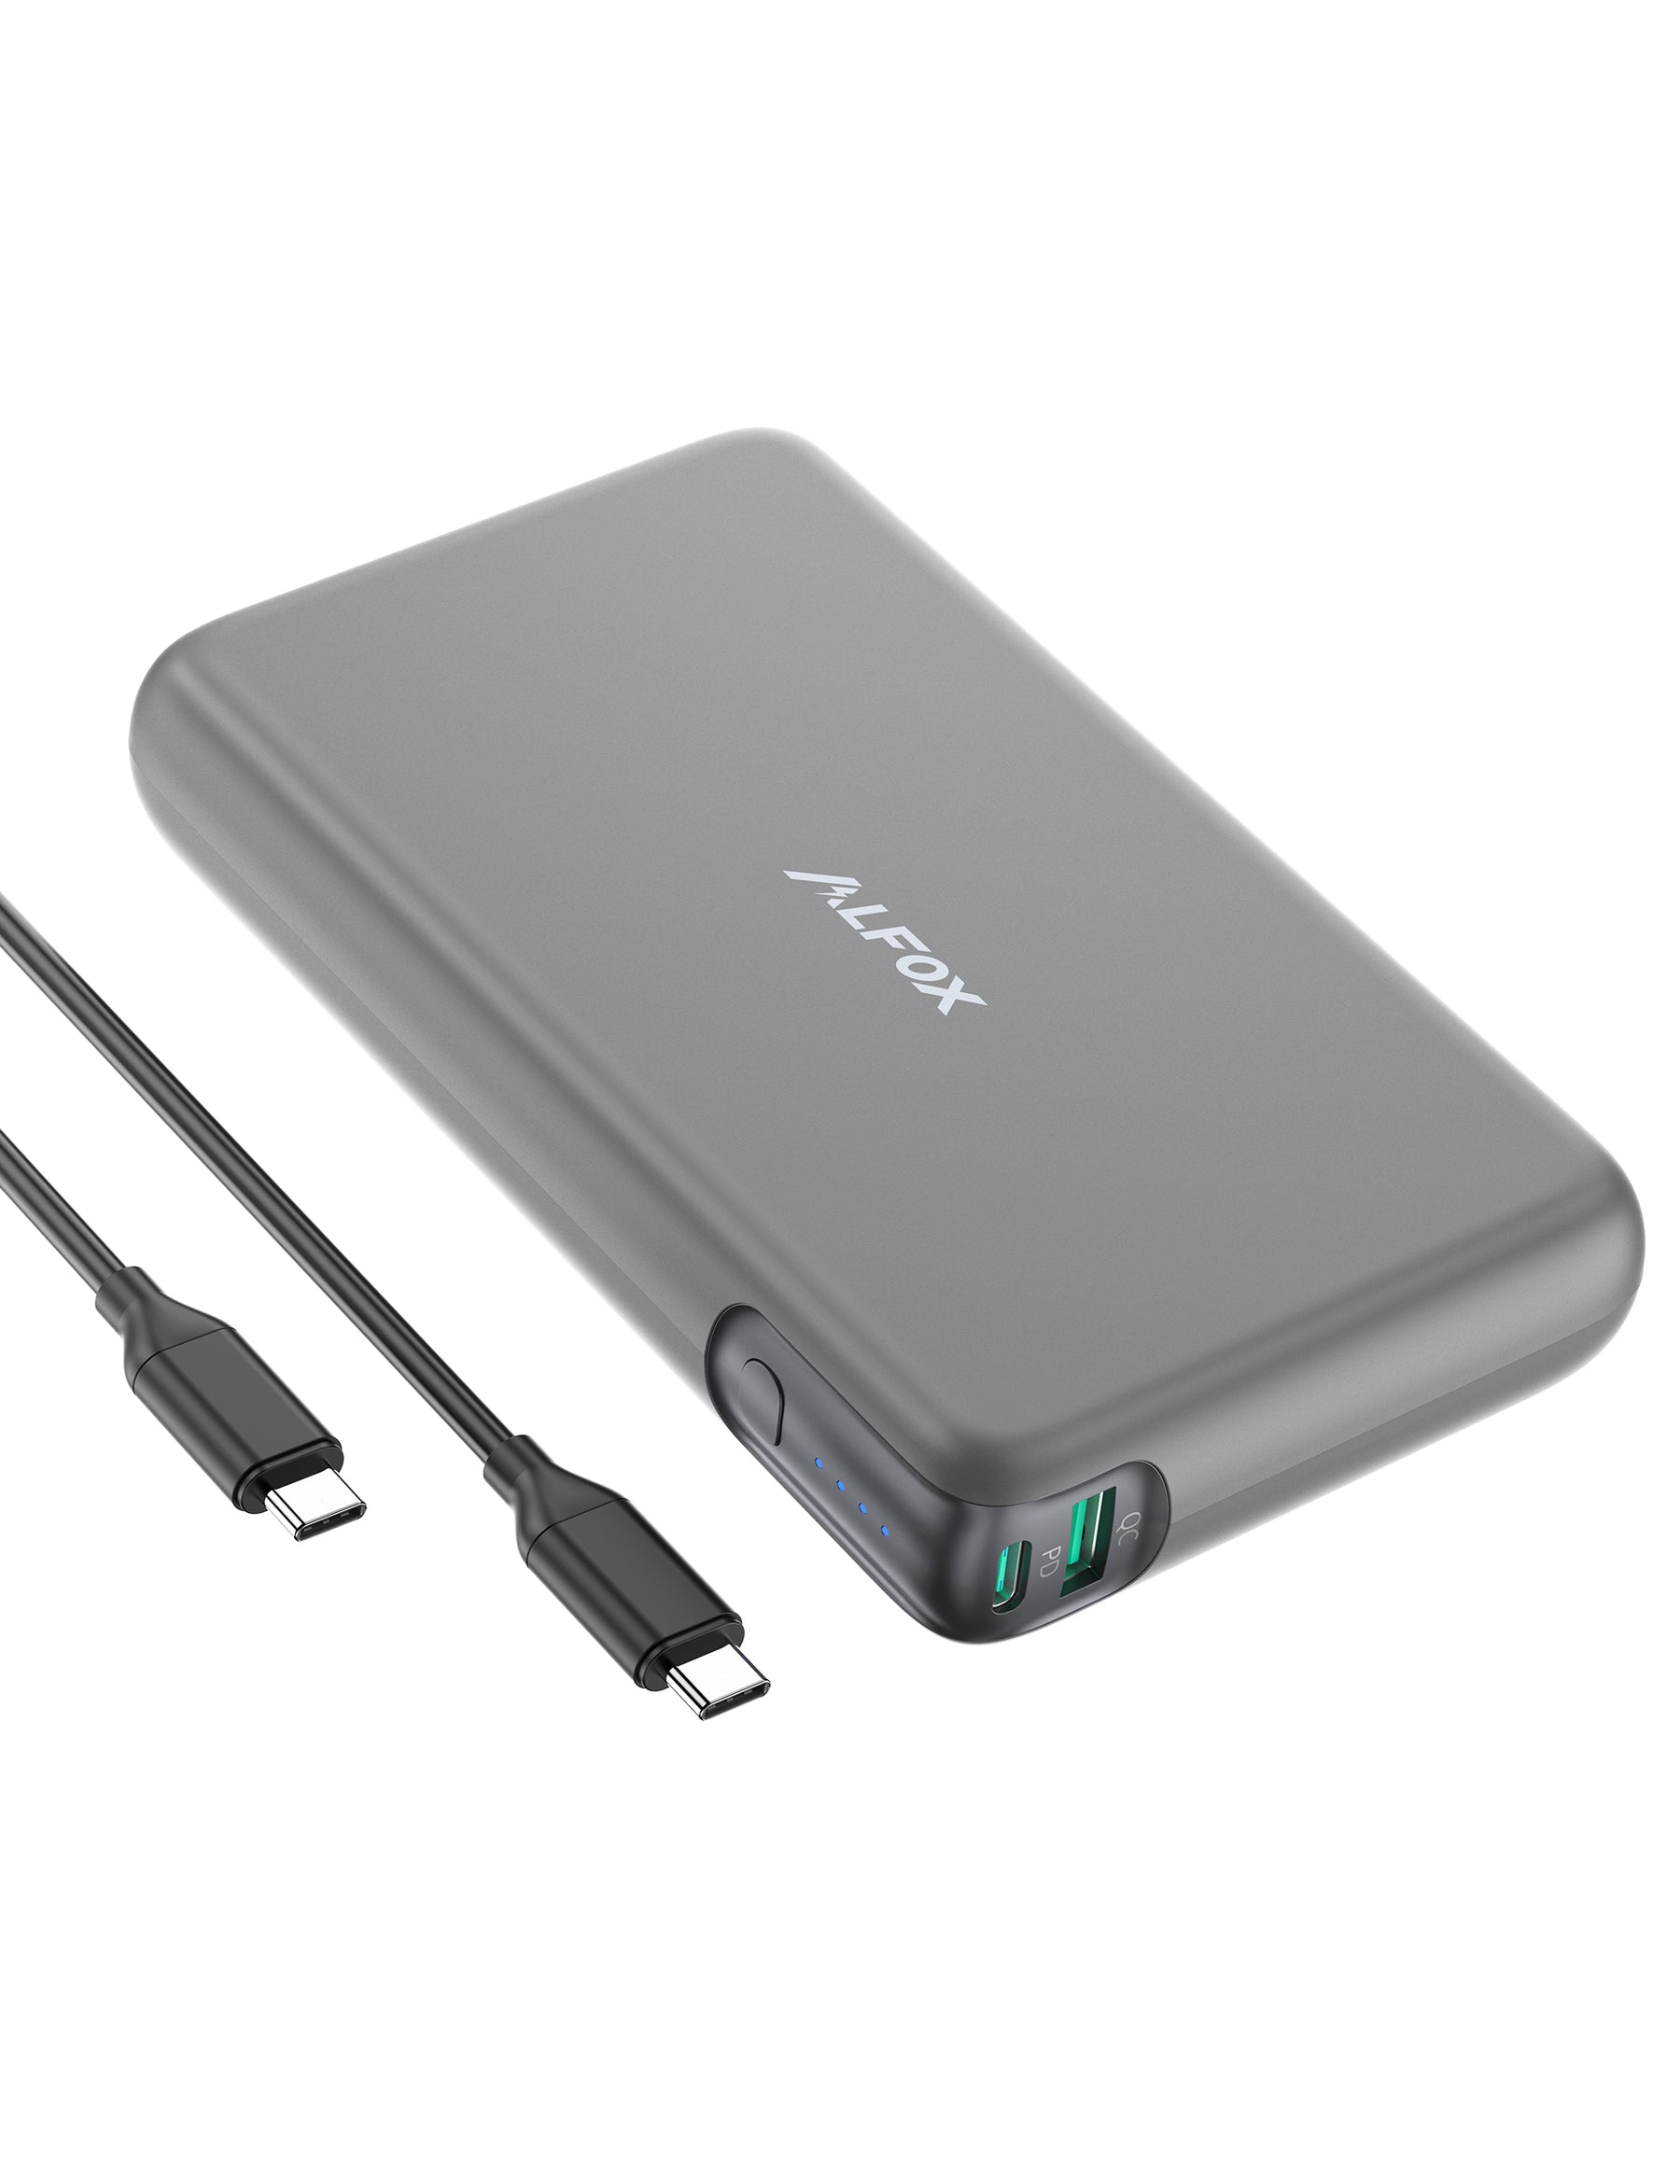 300000mAh Power Bank 2 USB Fast Charging Charger Portable External Battery  Pack